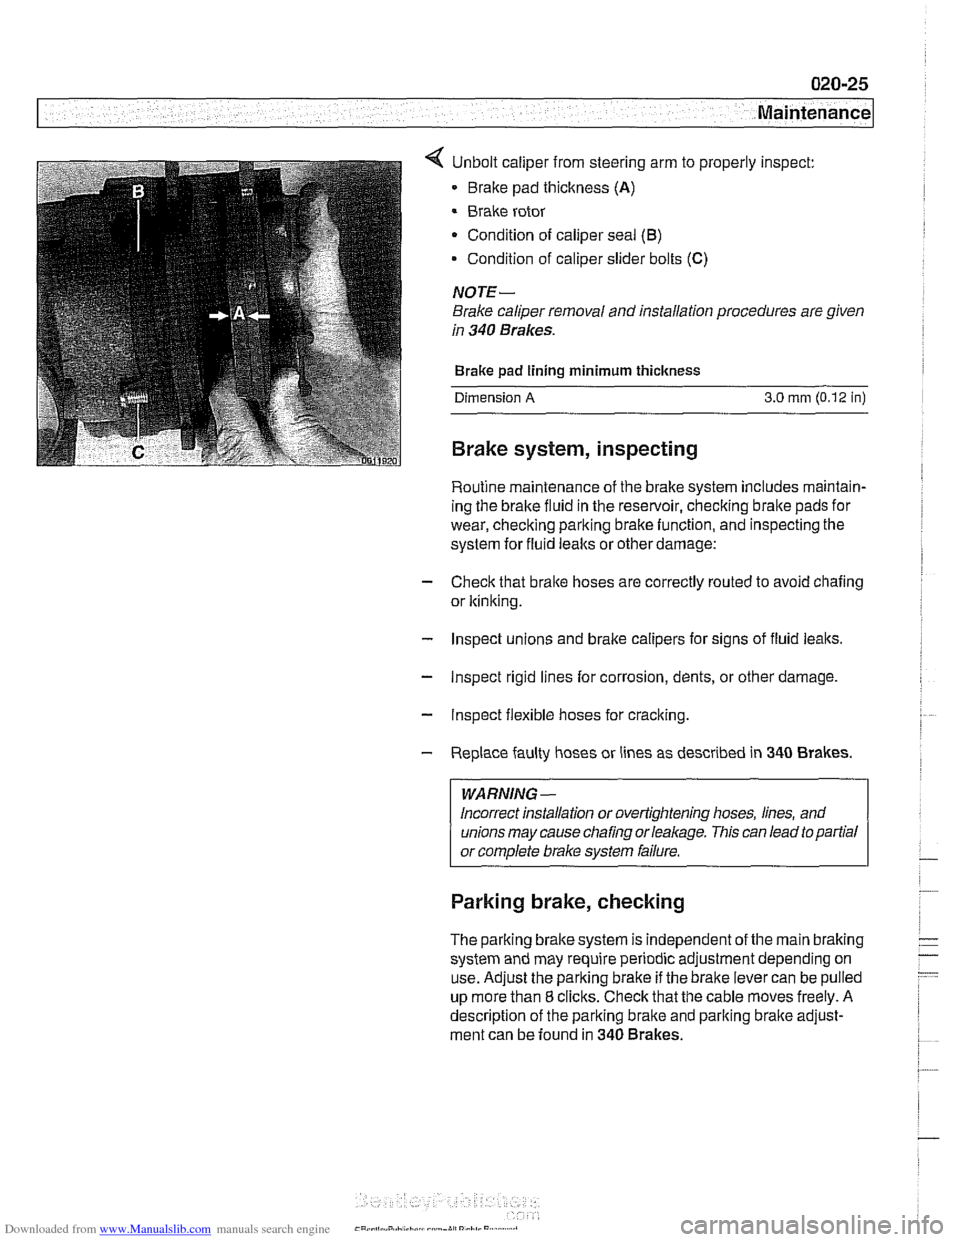 BMW 528i 1998 E39 Workshop Manual Downloaded from www.Manualslib.com manuals search engine 
7 Maintenance 
< Unbolt caliper from steering arm  to properly  inspect: 
Brake  pad thickness 
(A) 
Brake rotor 
Condition  of caliper seal 
